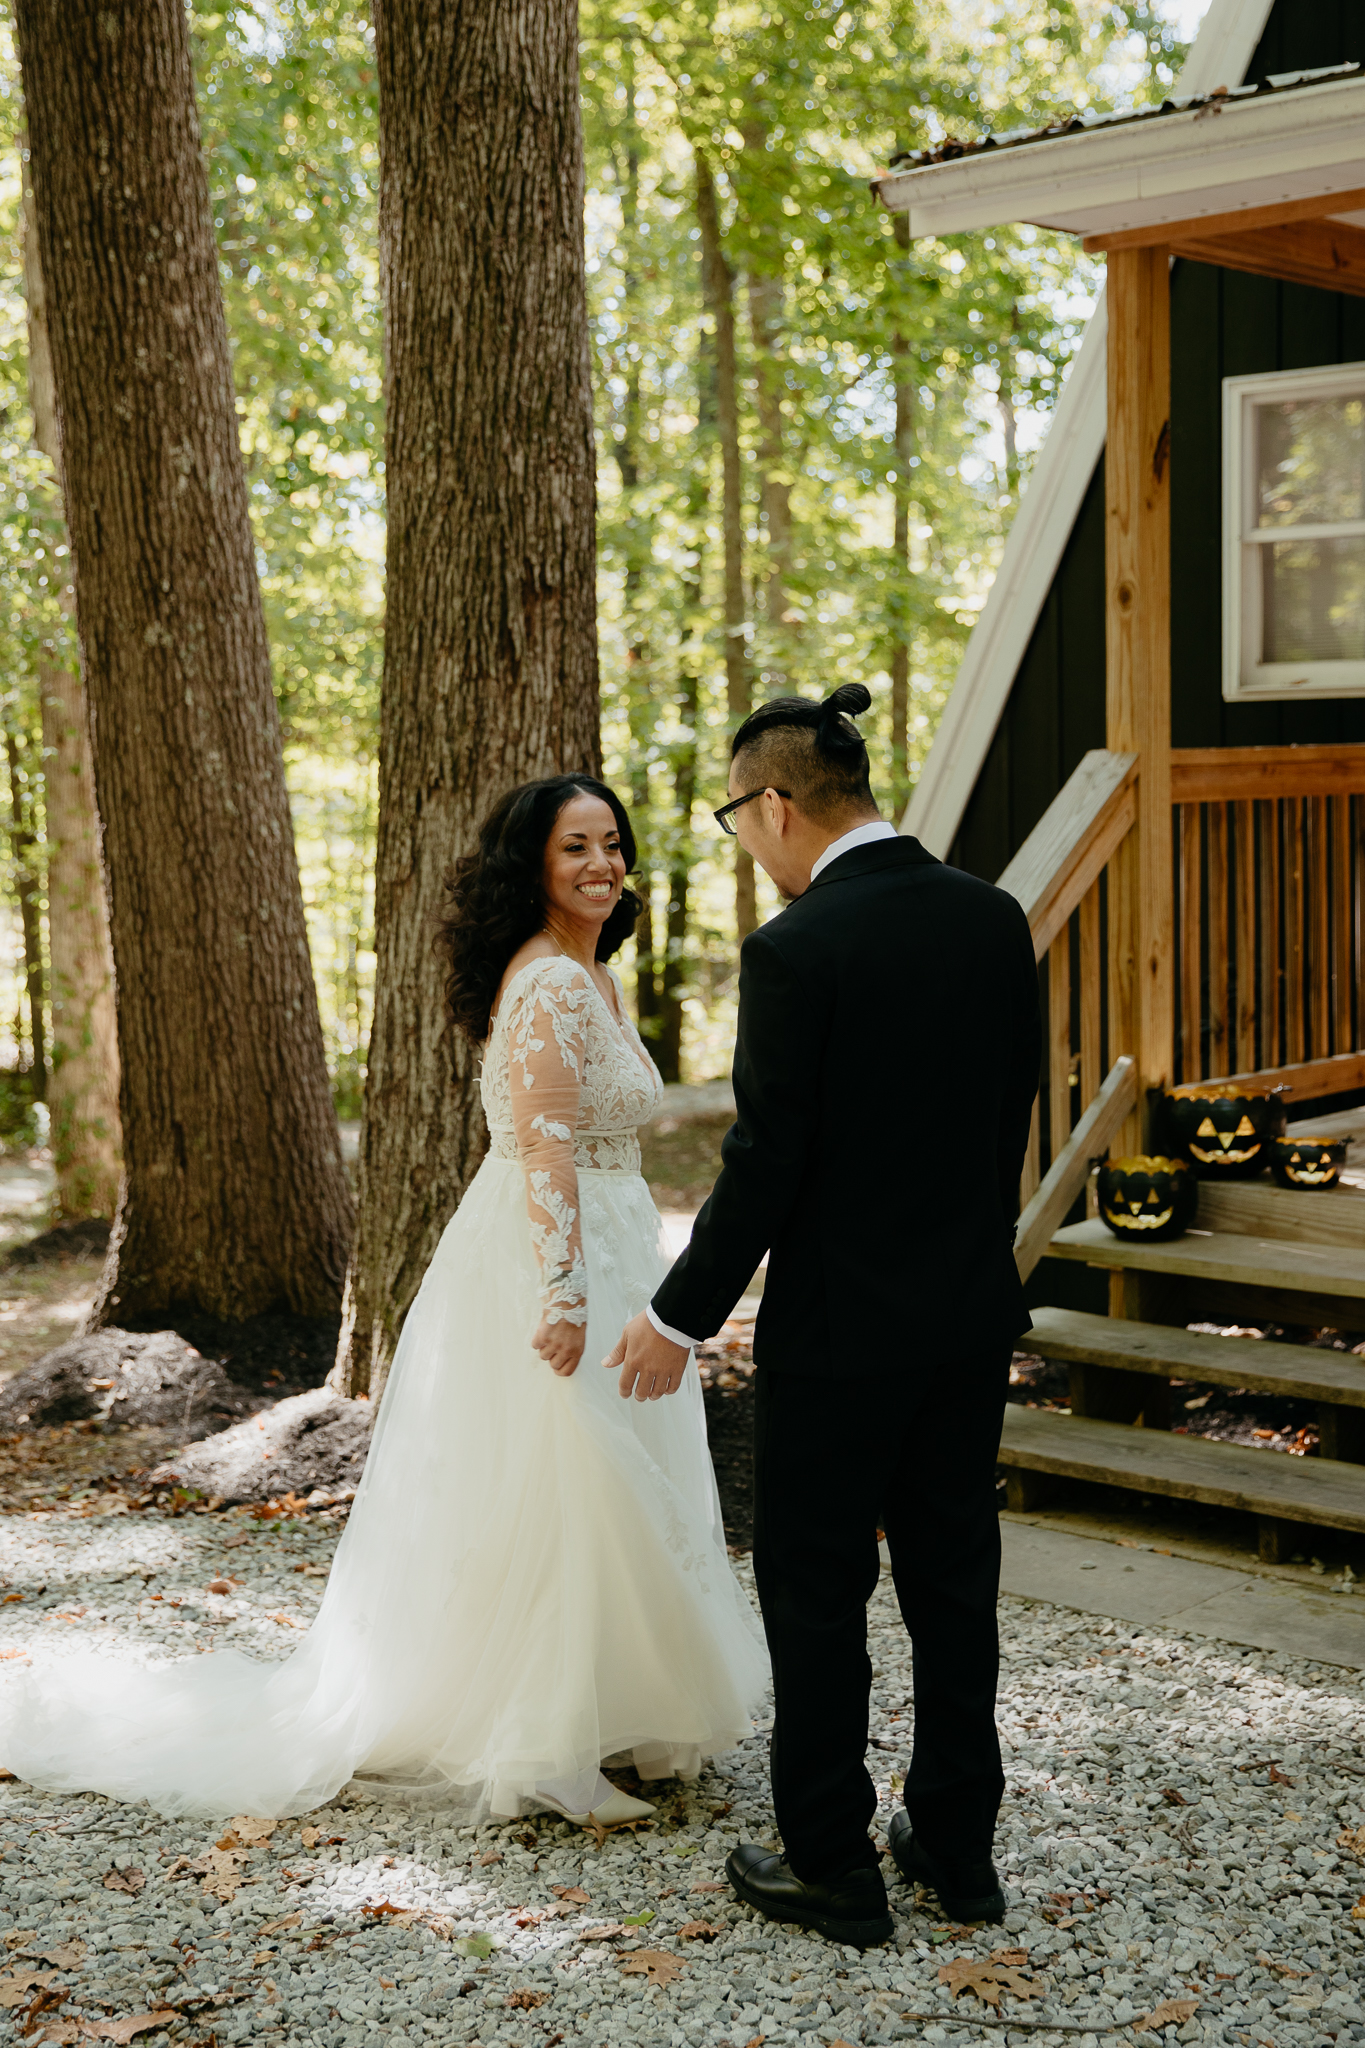 Indiana Brown County Elopement // First look with an A-frame Cabin